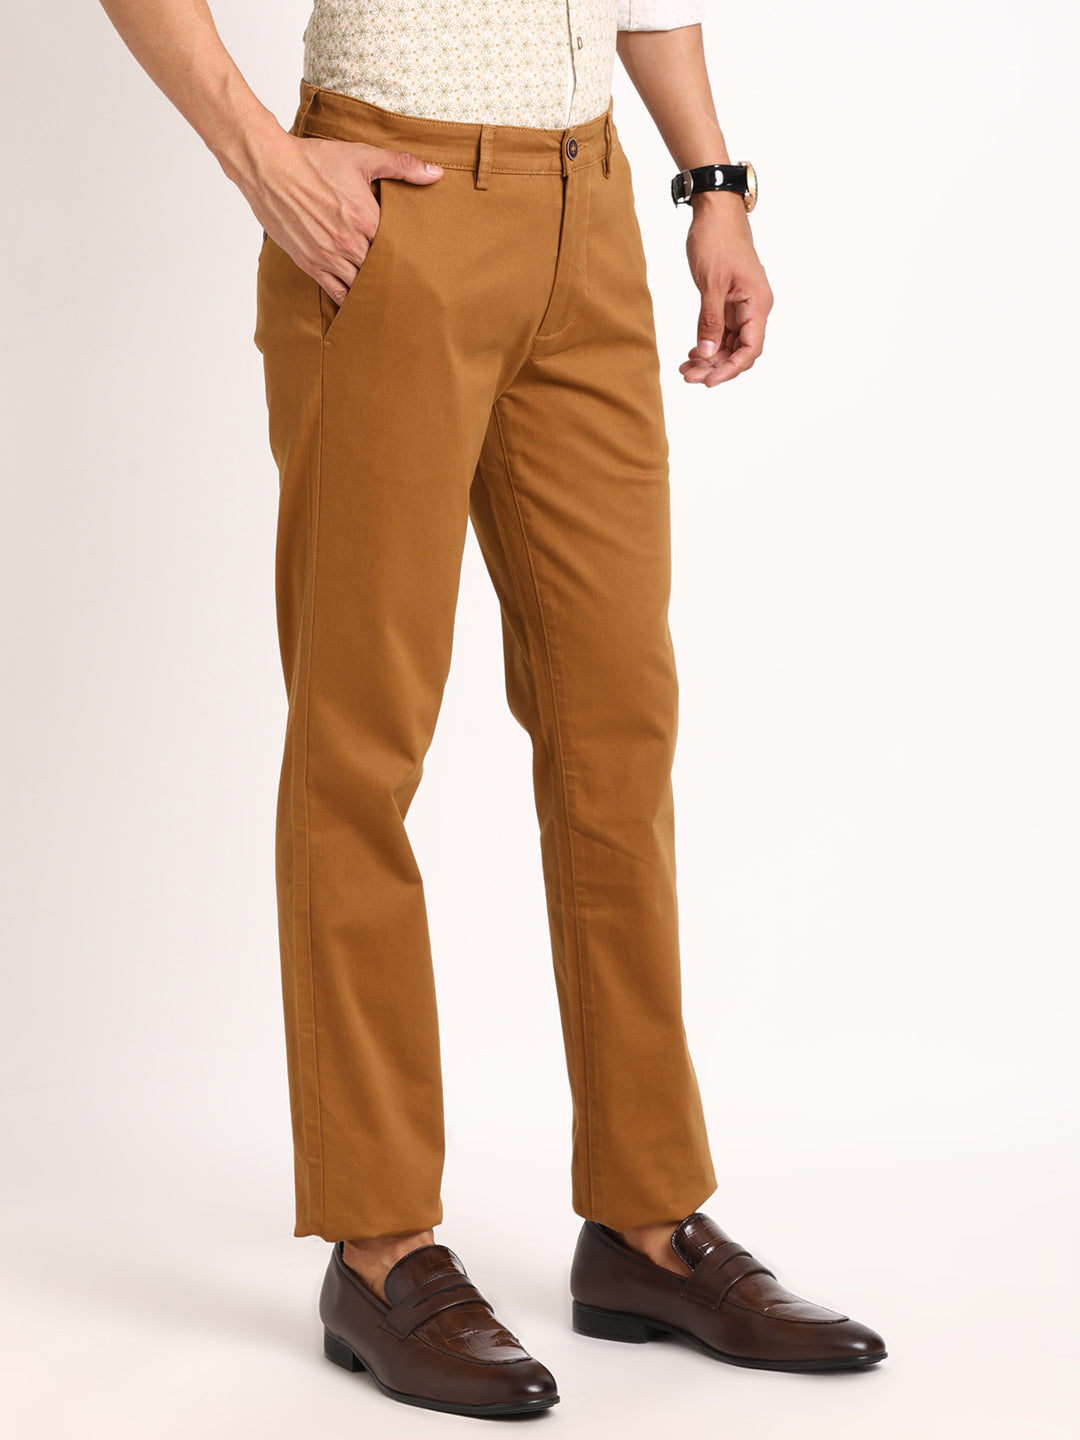 Cotton Stretch Khaki Printed Ultra Slim Fit Flat Front Casual Trouser